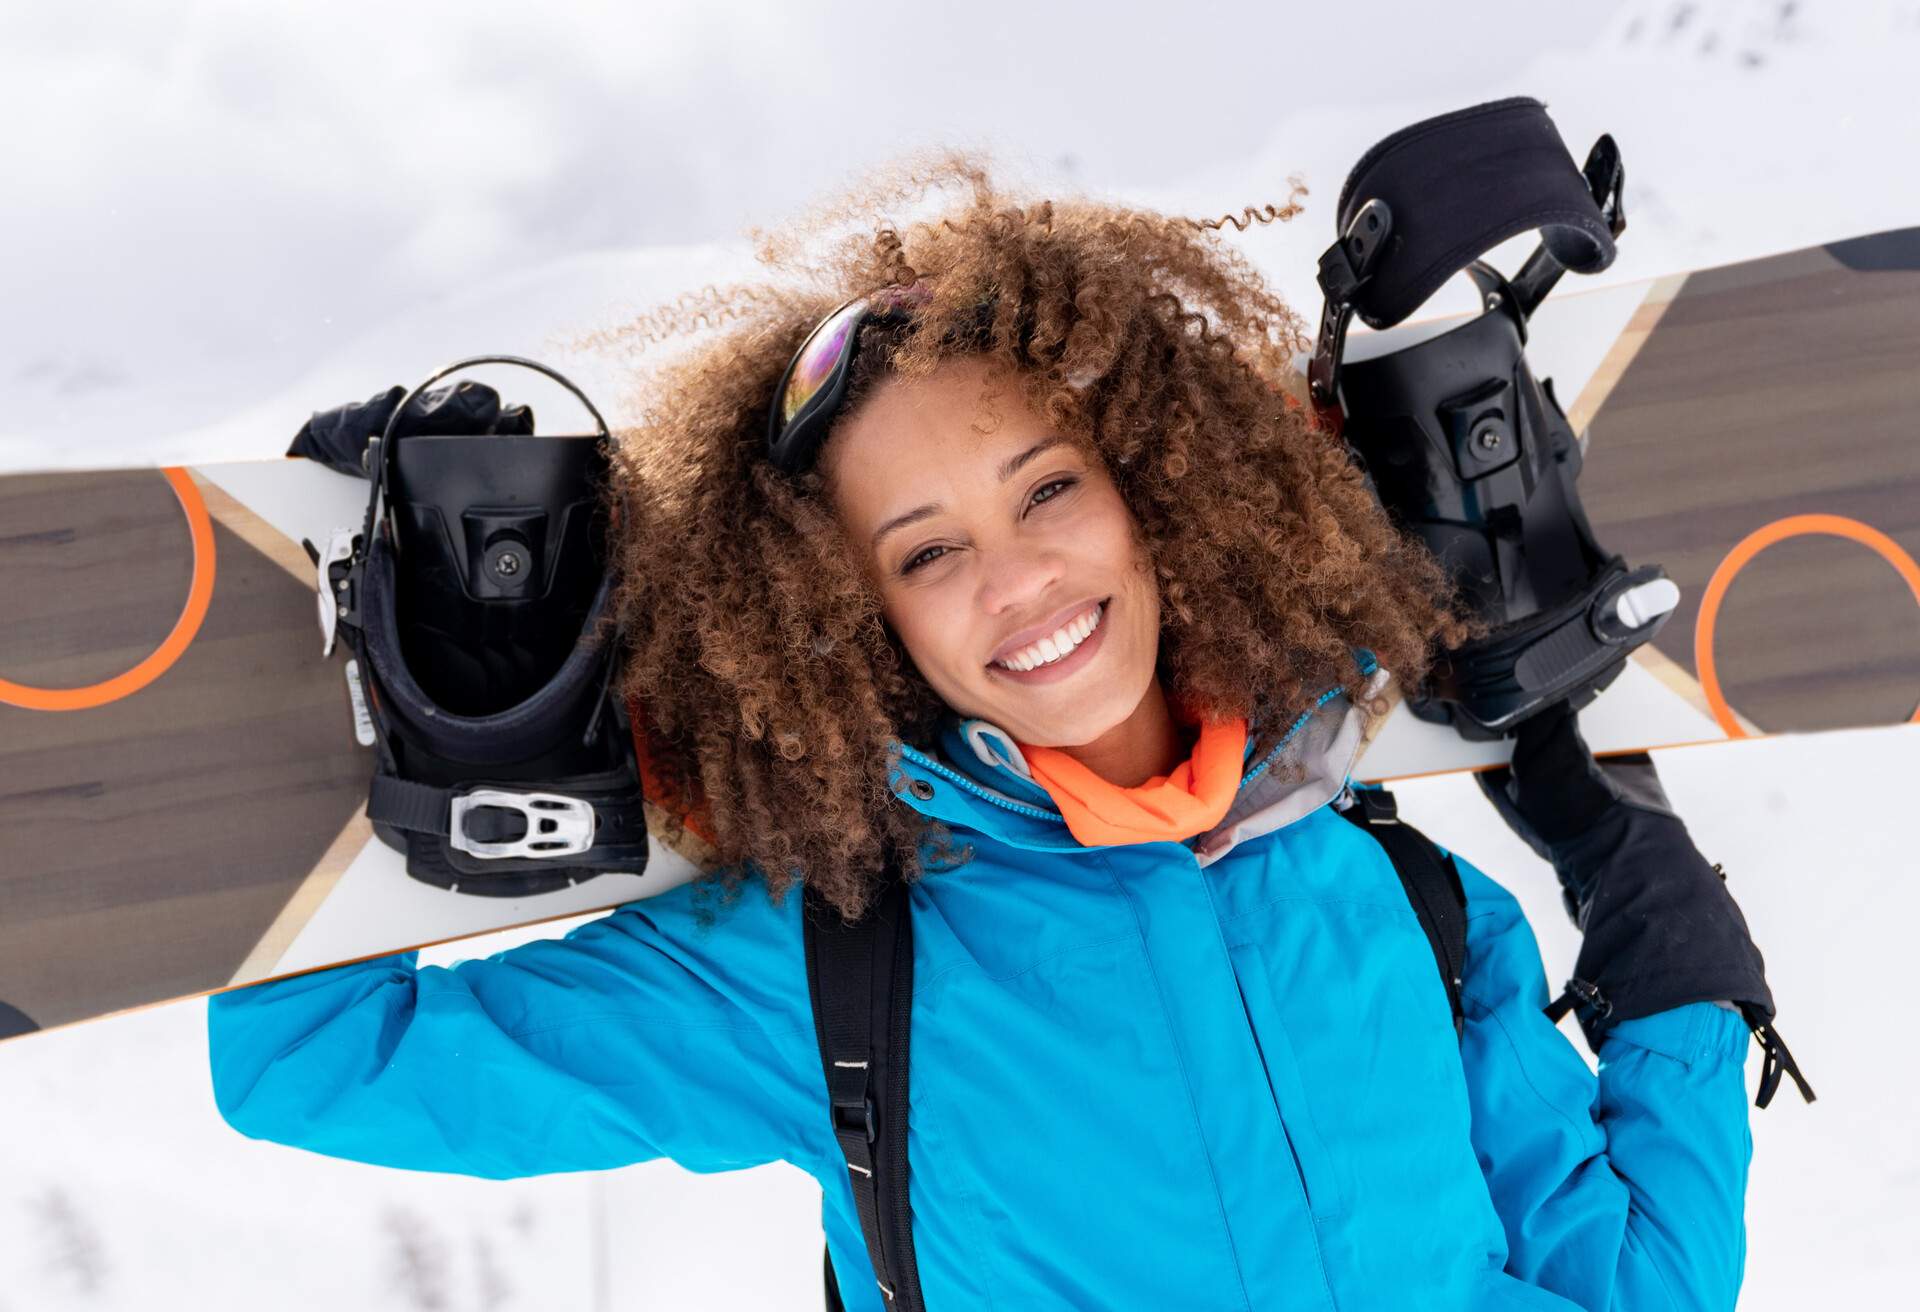 Portrait of a happy beautiful black woman snowboarding looking at the camera smiling - winter sports lifestyle